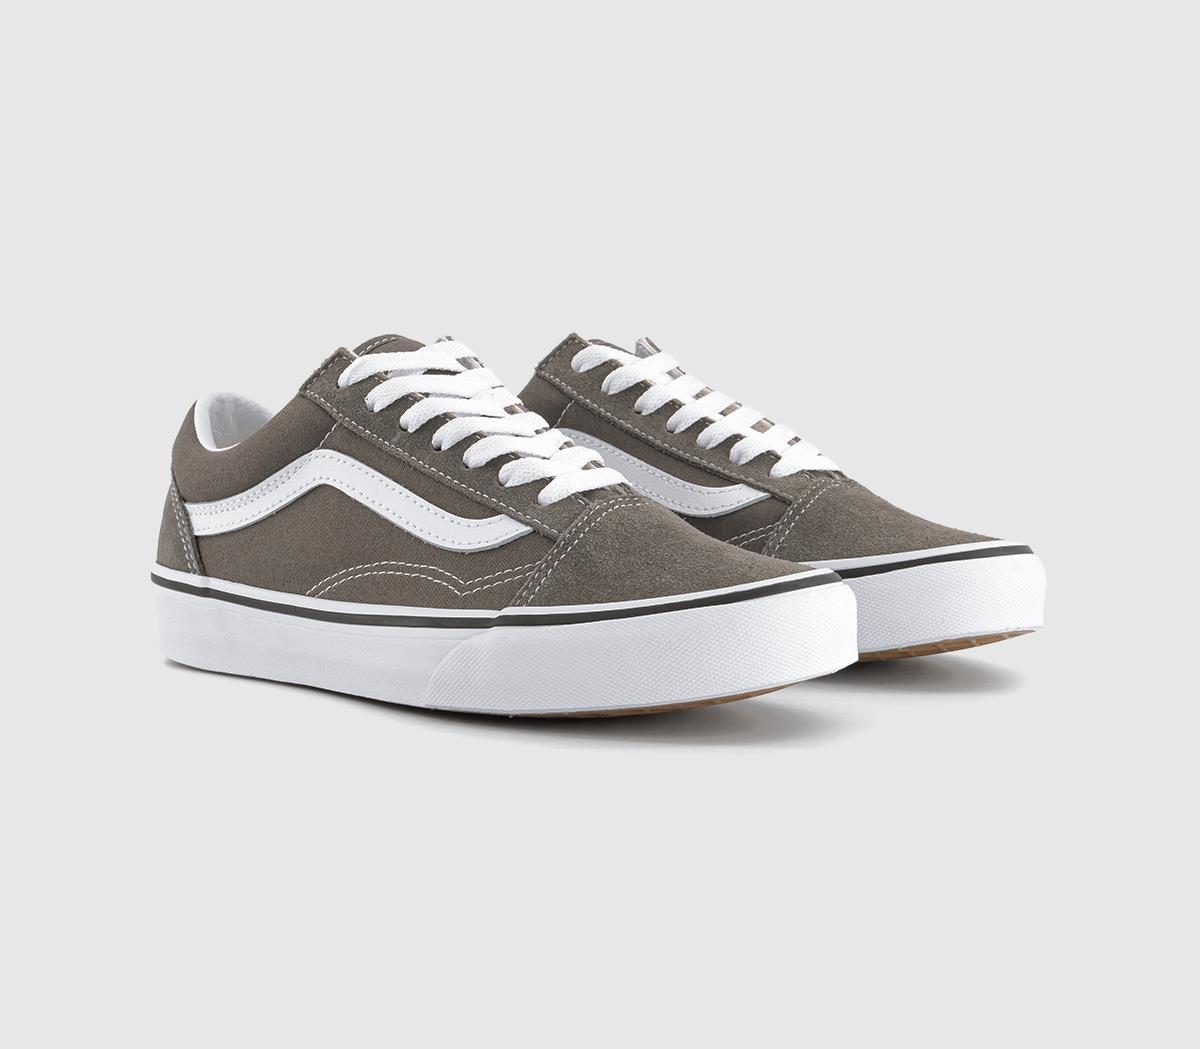 Vans Old Skool Trainers Color Theory Bungee Cord Natural, 6